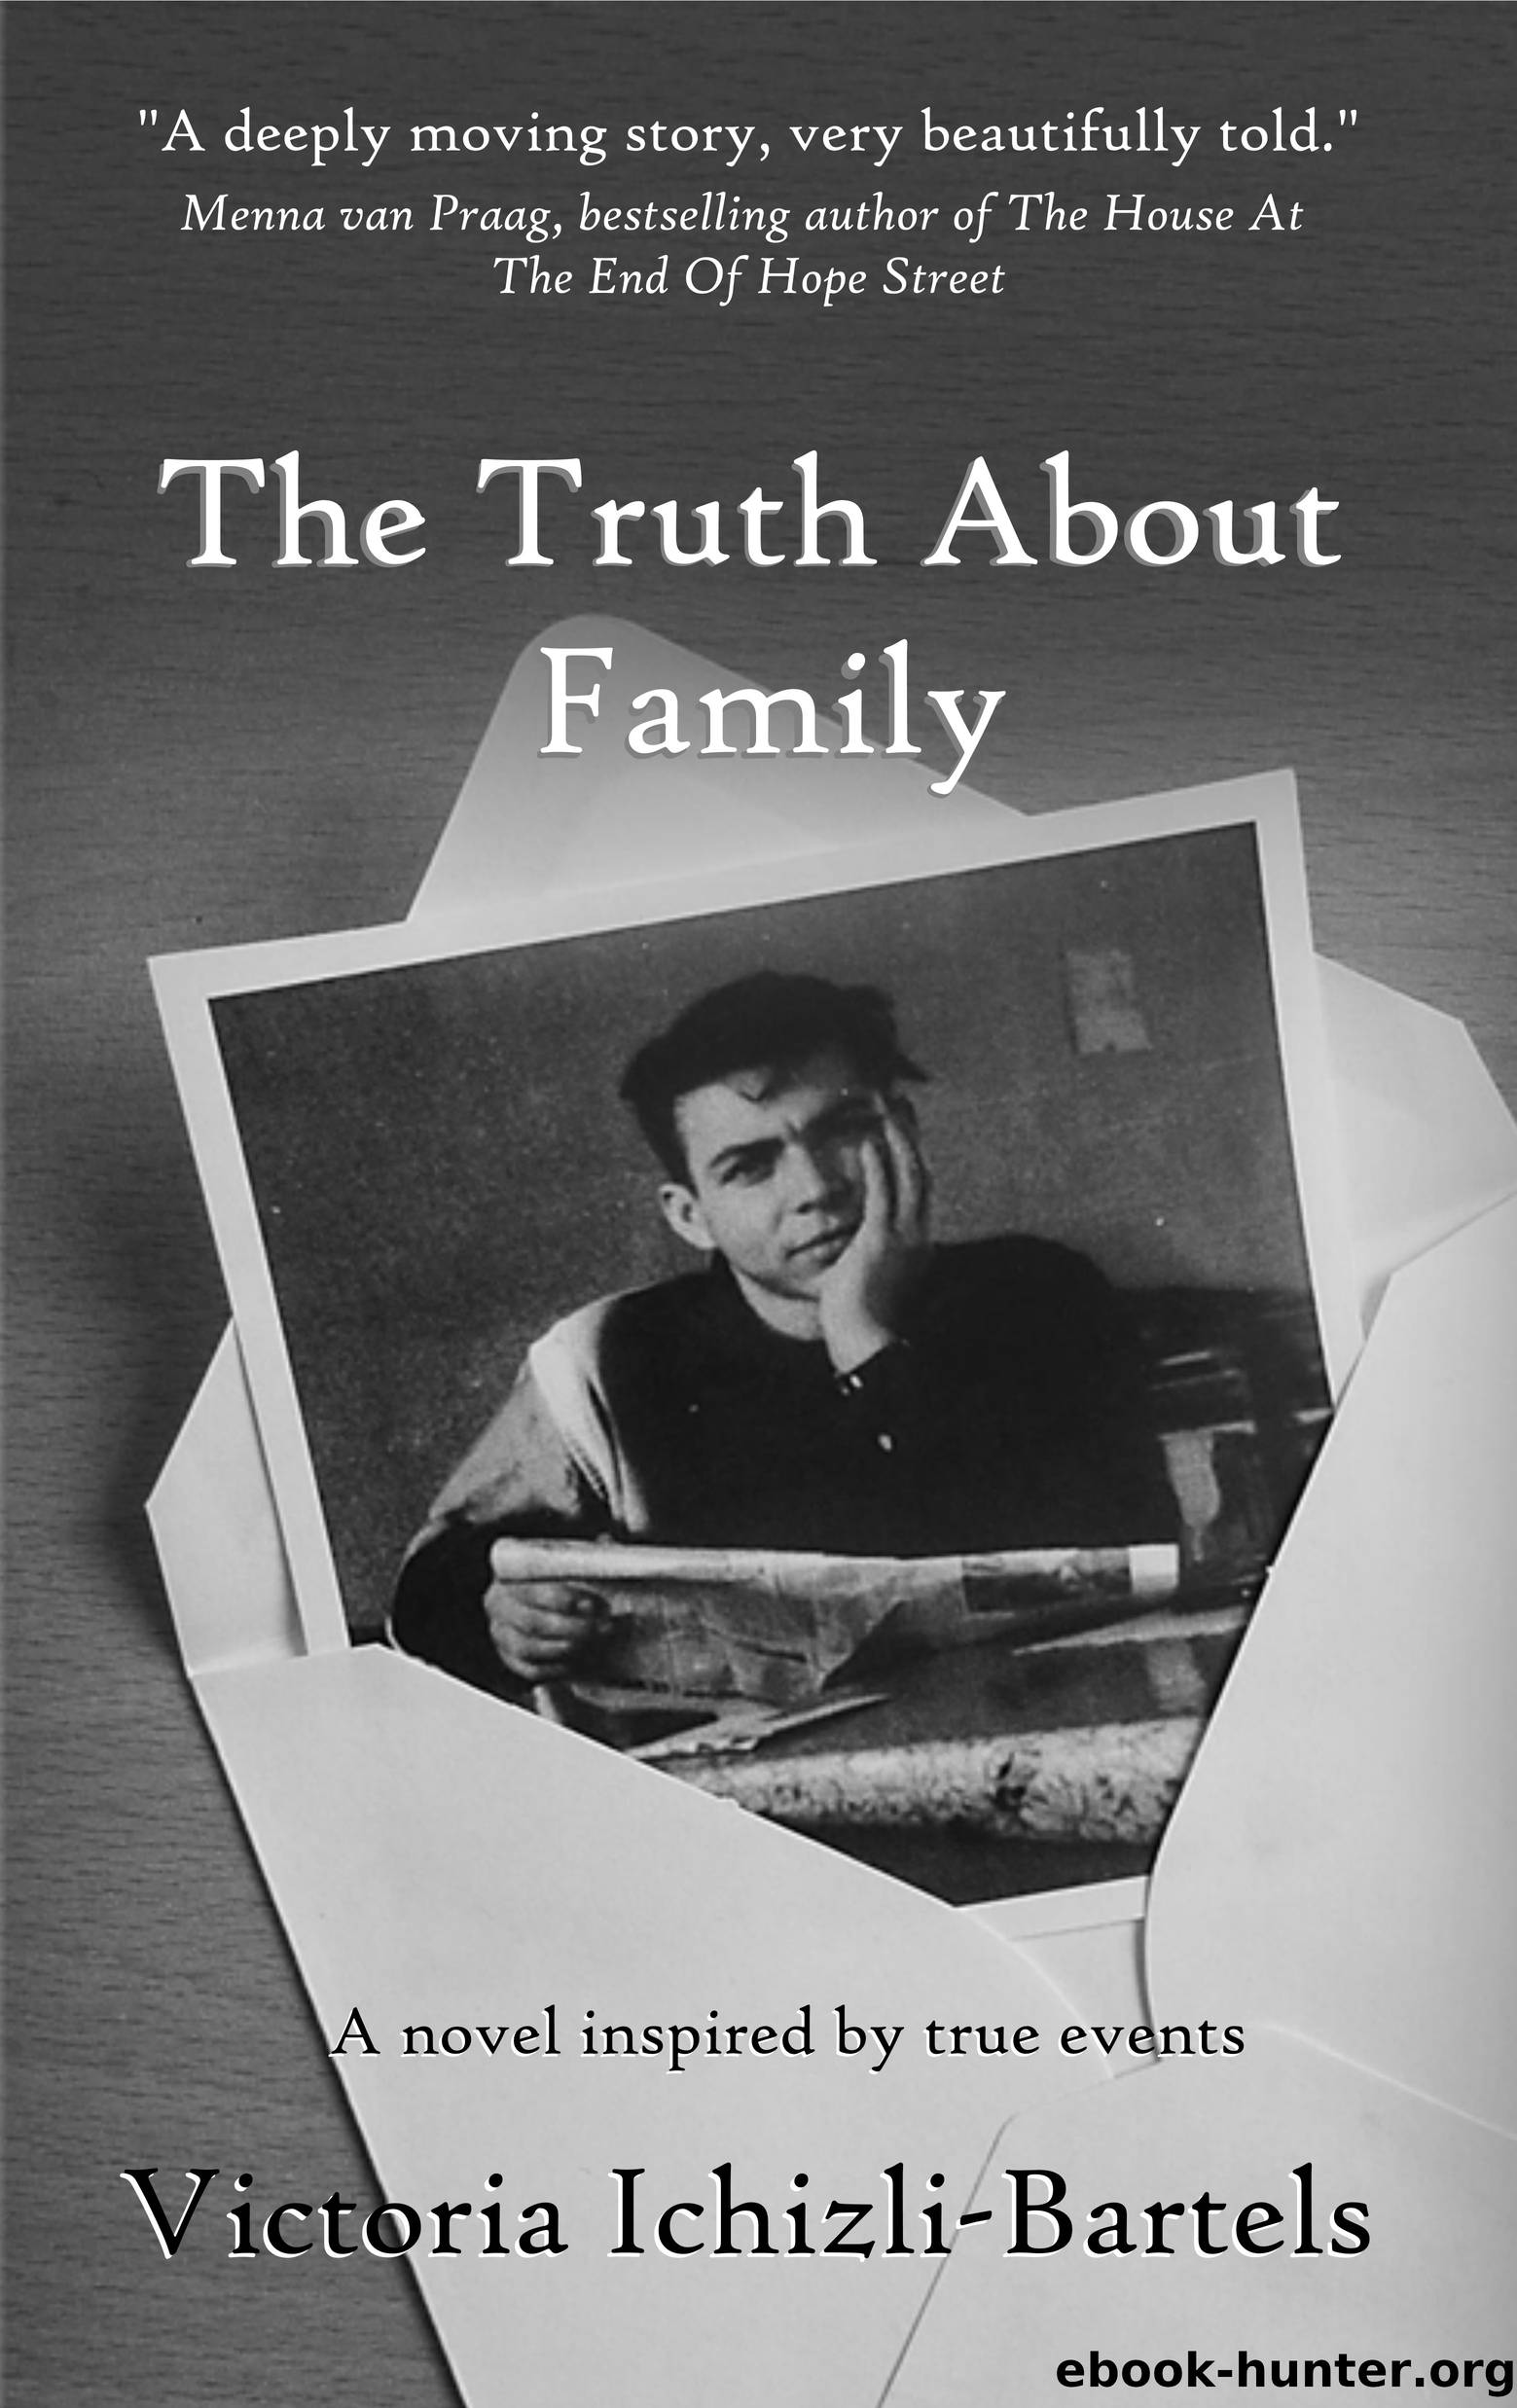 The Truth About Family by Victoria Ichizli-Bartels